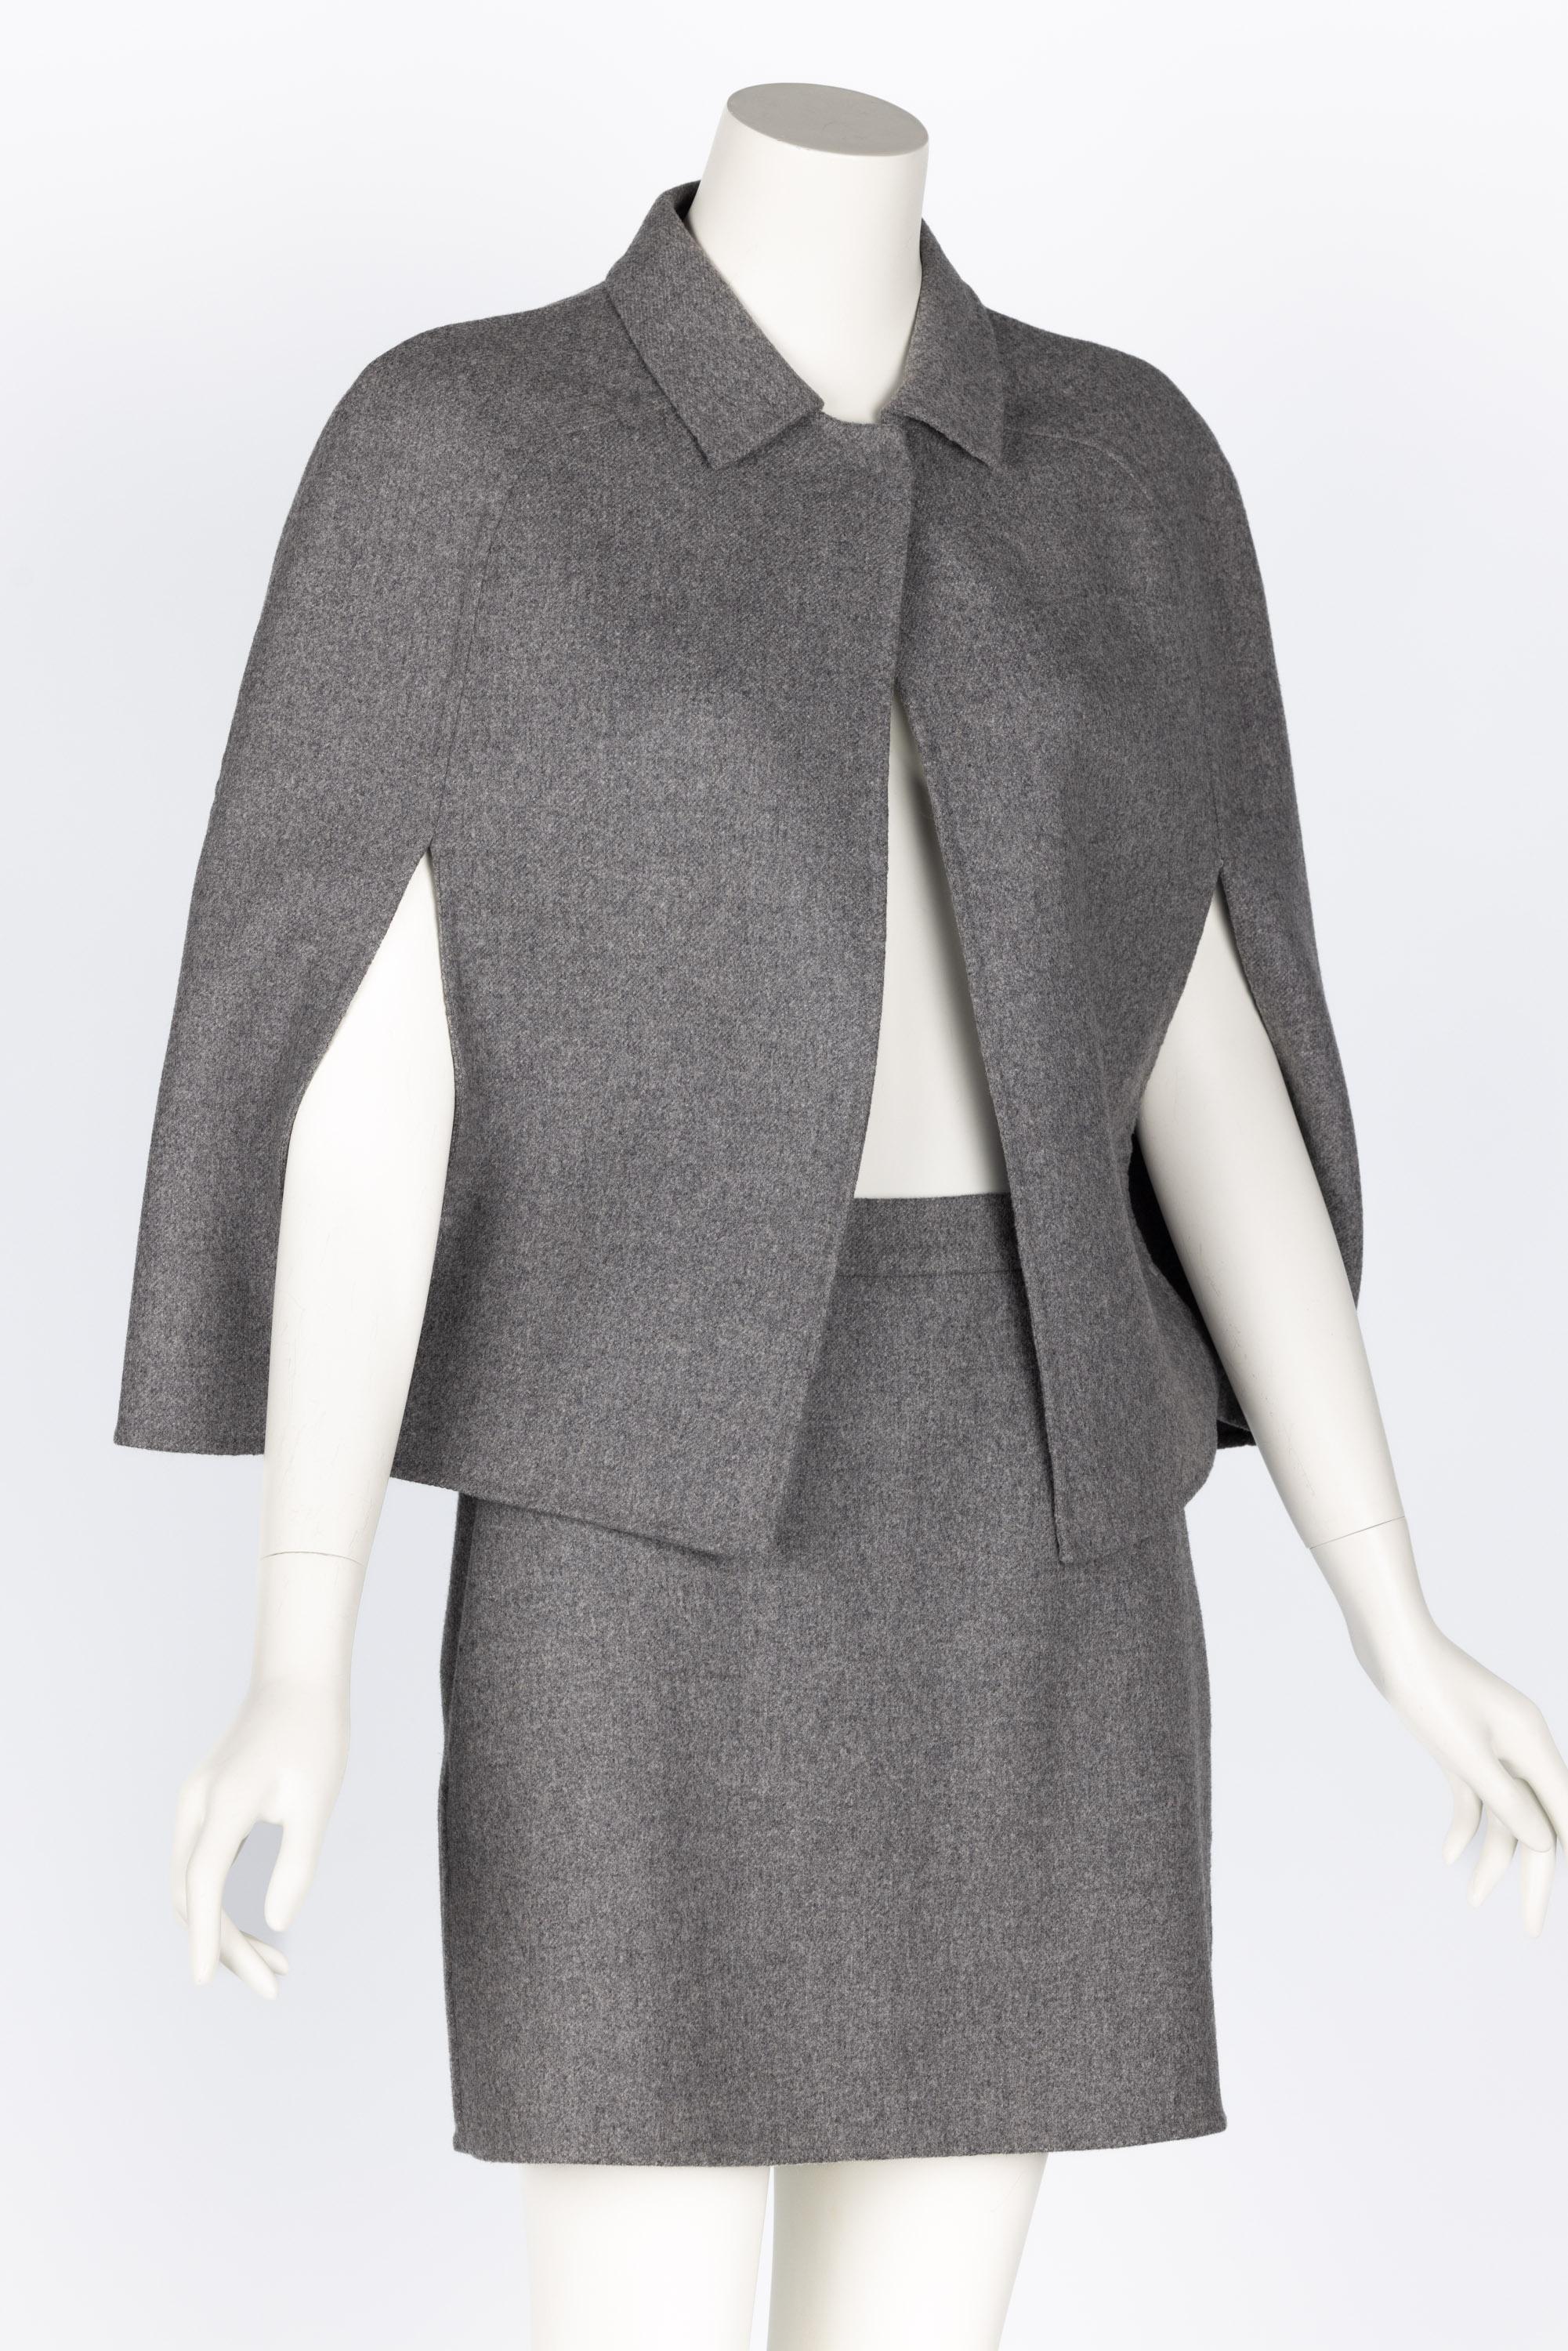 Valentino Grey Wool Angora Cape Mini Skirt Suit Set In Excellent Condition For Sale In Boca Raton, FL